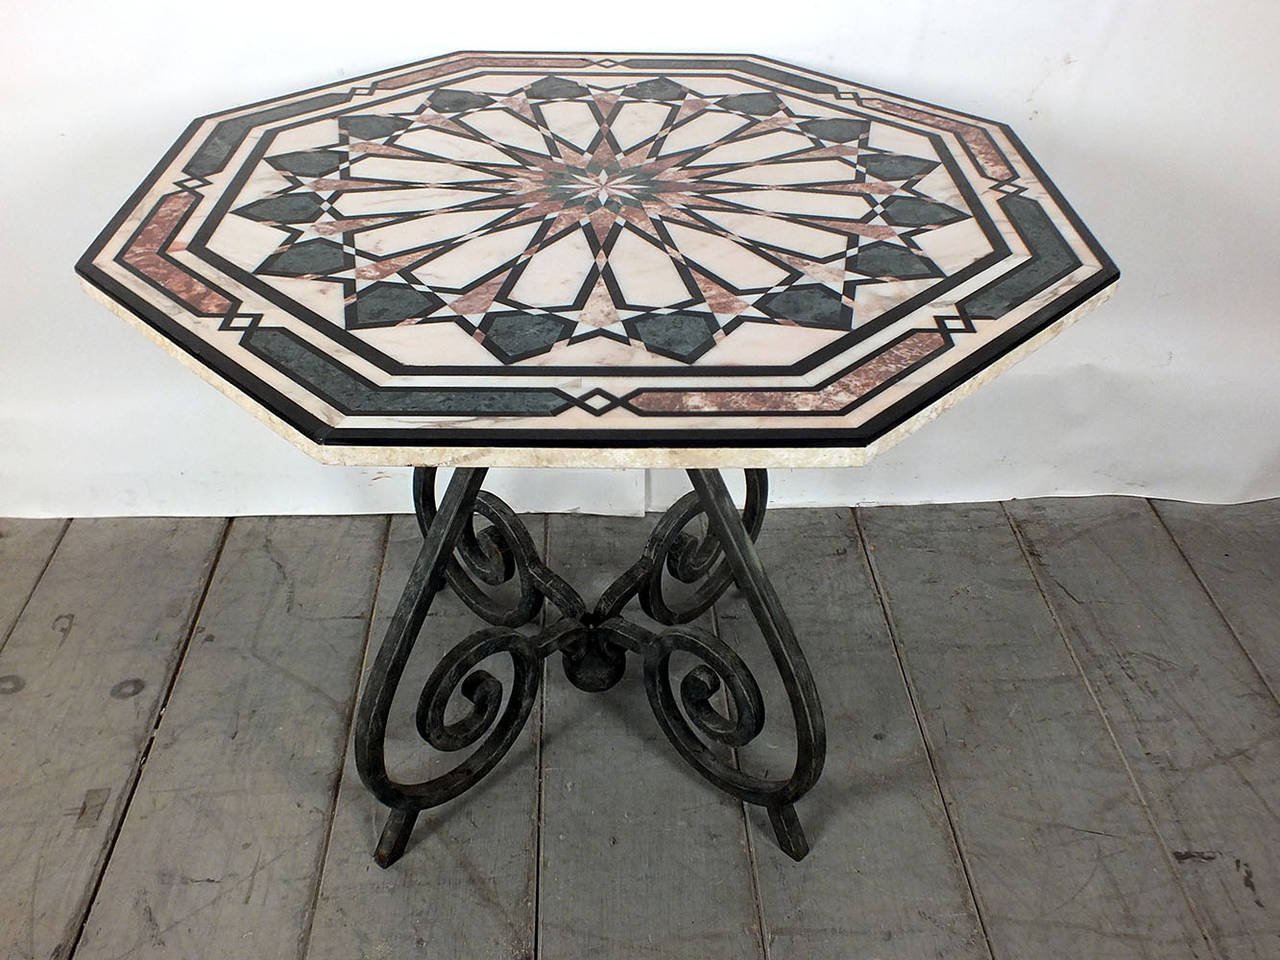 This is a 1970s Vintage Italian-style centre table that features a beautiful inlaid design upon the octagon shaped marble top. The iron pedestal legs have a scrolling design finished in a rustic color. Table is strong and sturdy ready to be used and